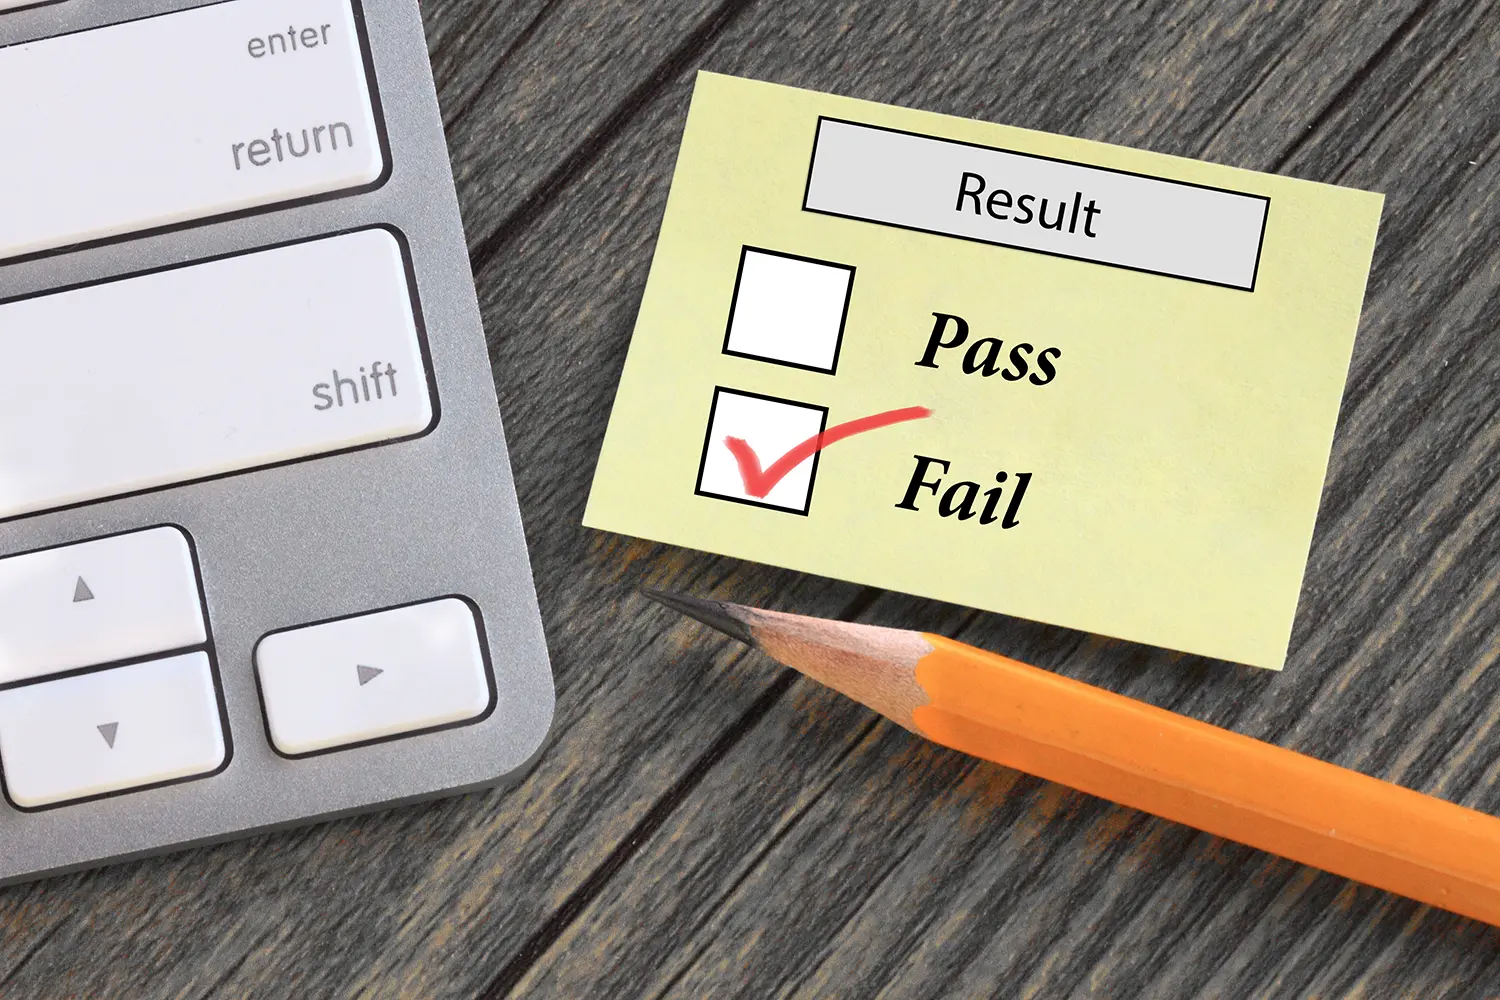 post-it note with check boxes for Pass and Fail; Fail is checked